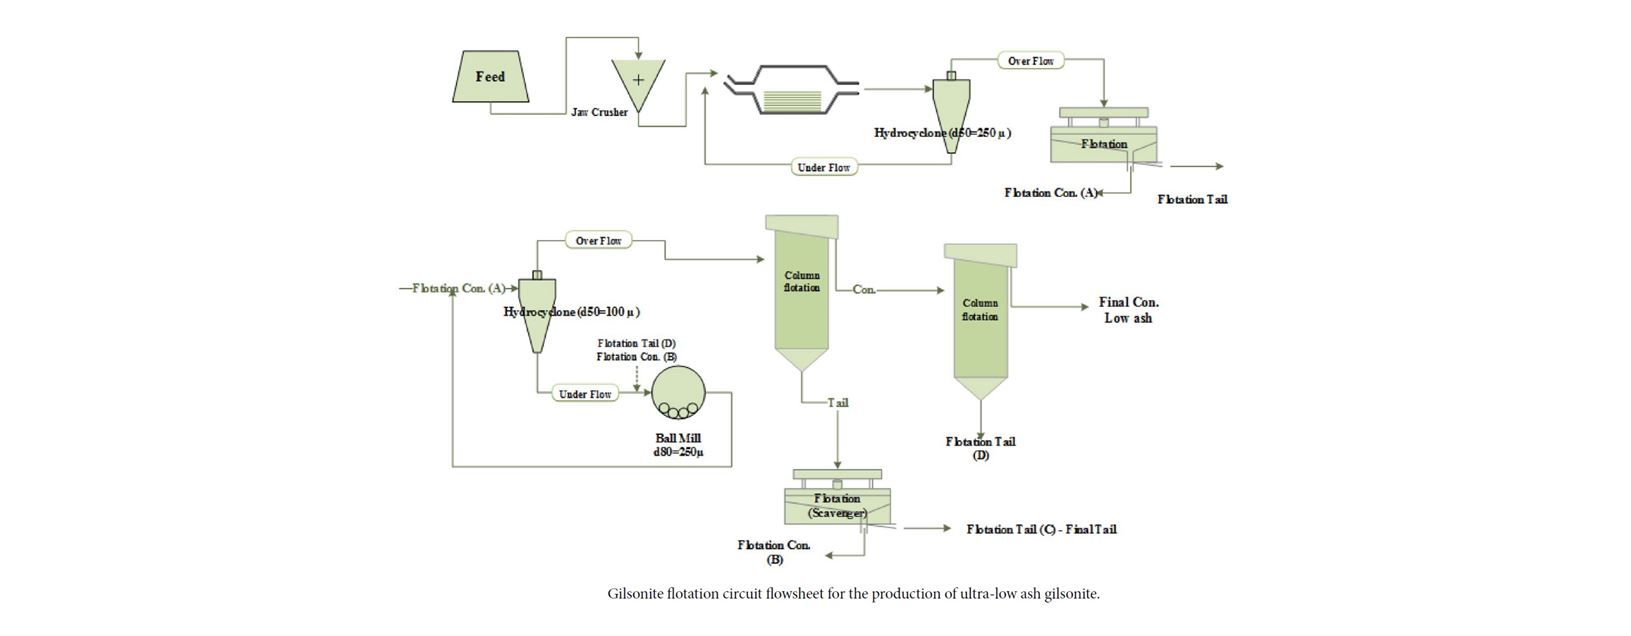 A processing flowsheet for the production of ultra-lowash gilsonite